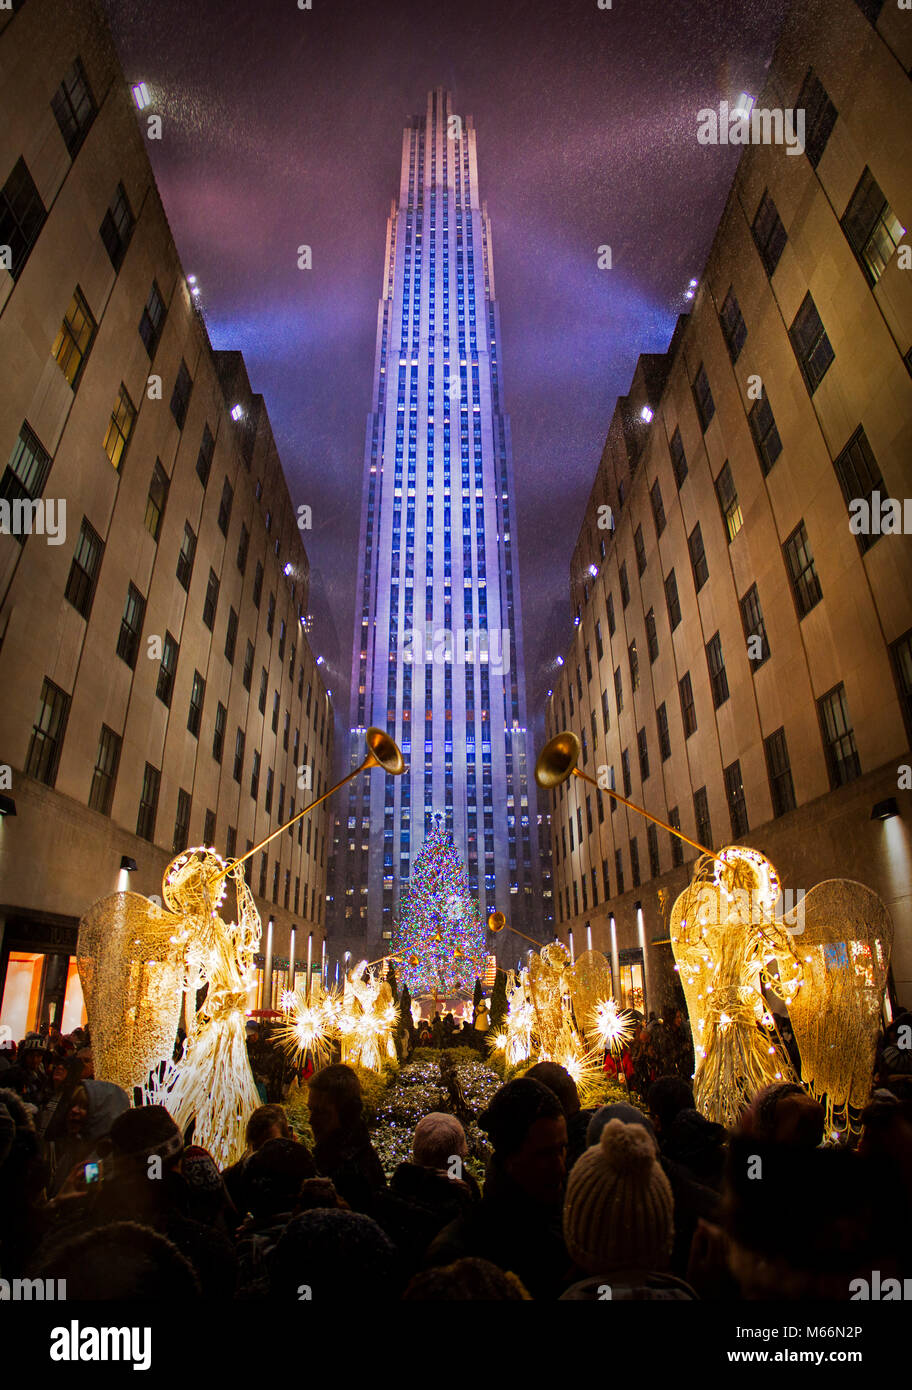 Sound the Trumpets! World Famous Rockefeller Tree Has Been Chosen